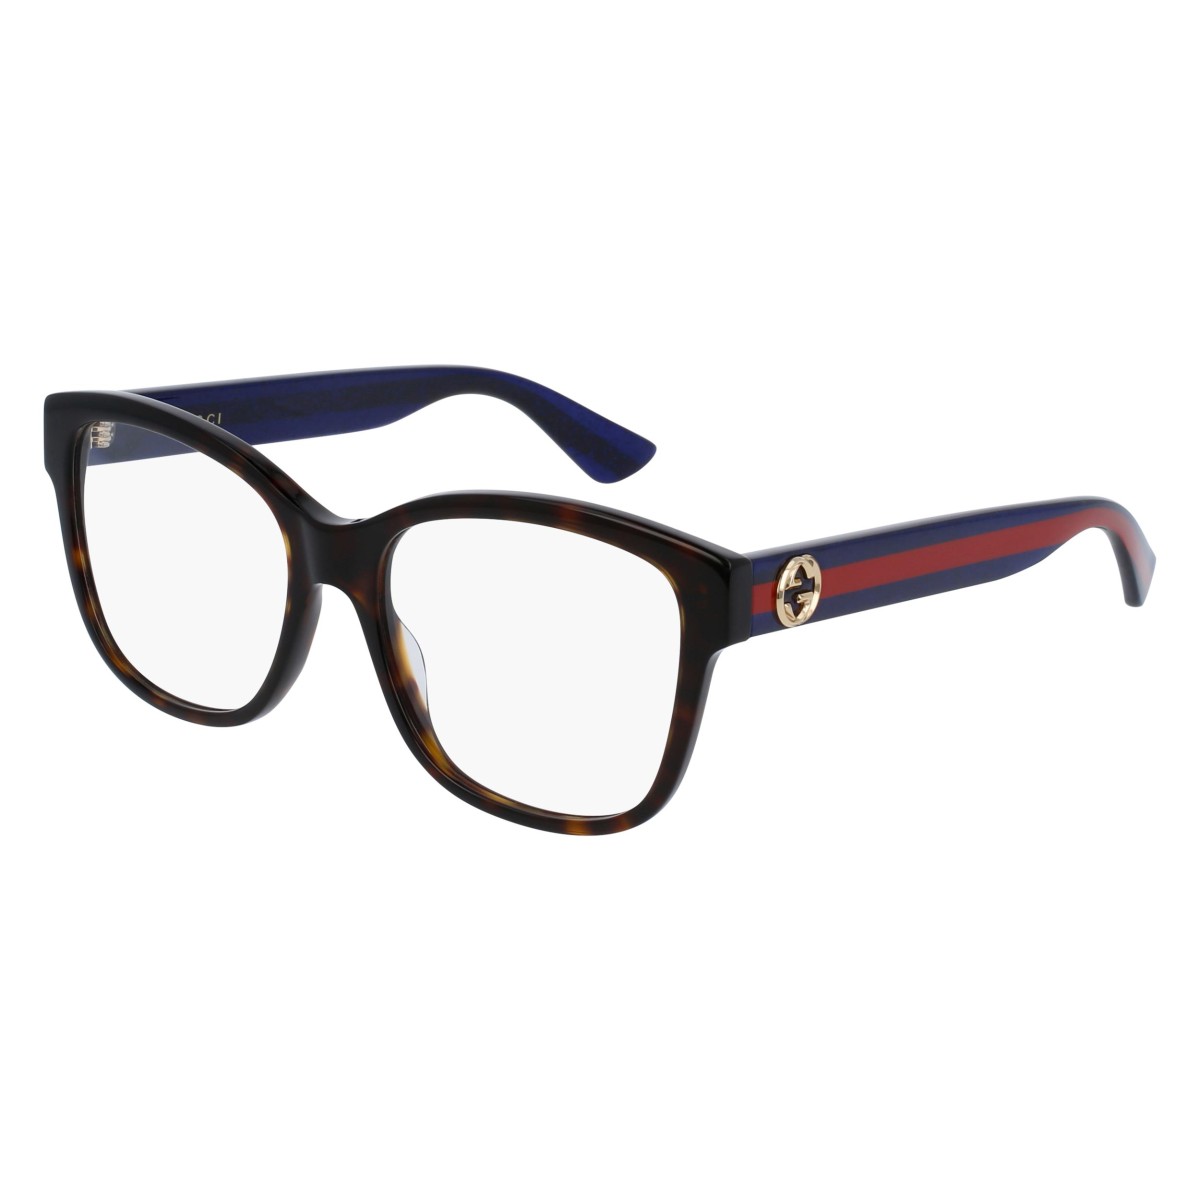 Gucci - GG0038ON 003 Tortoise/Blue/Red